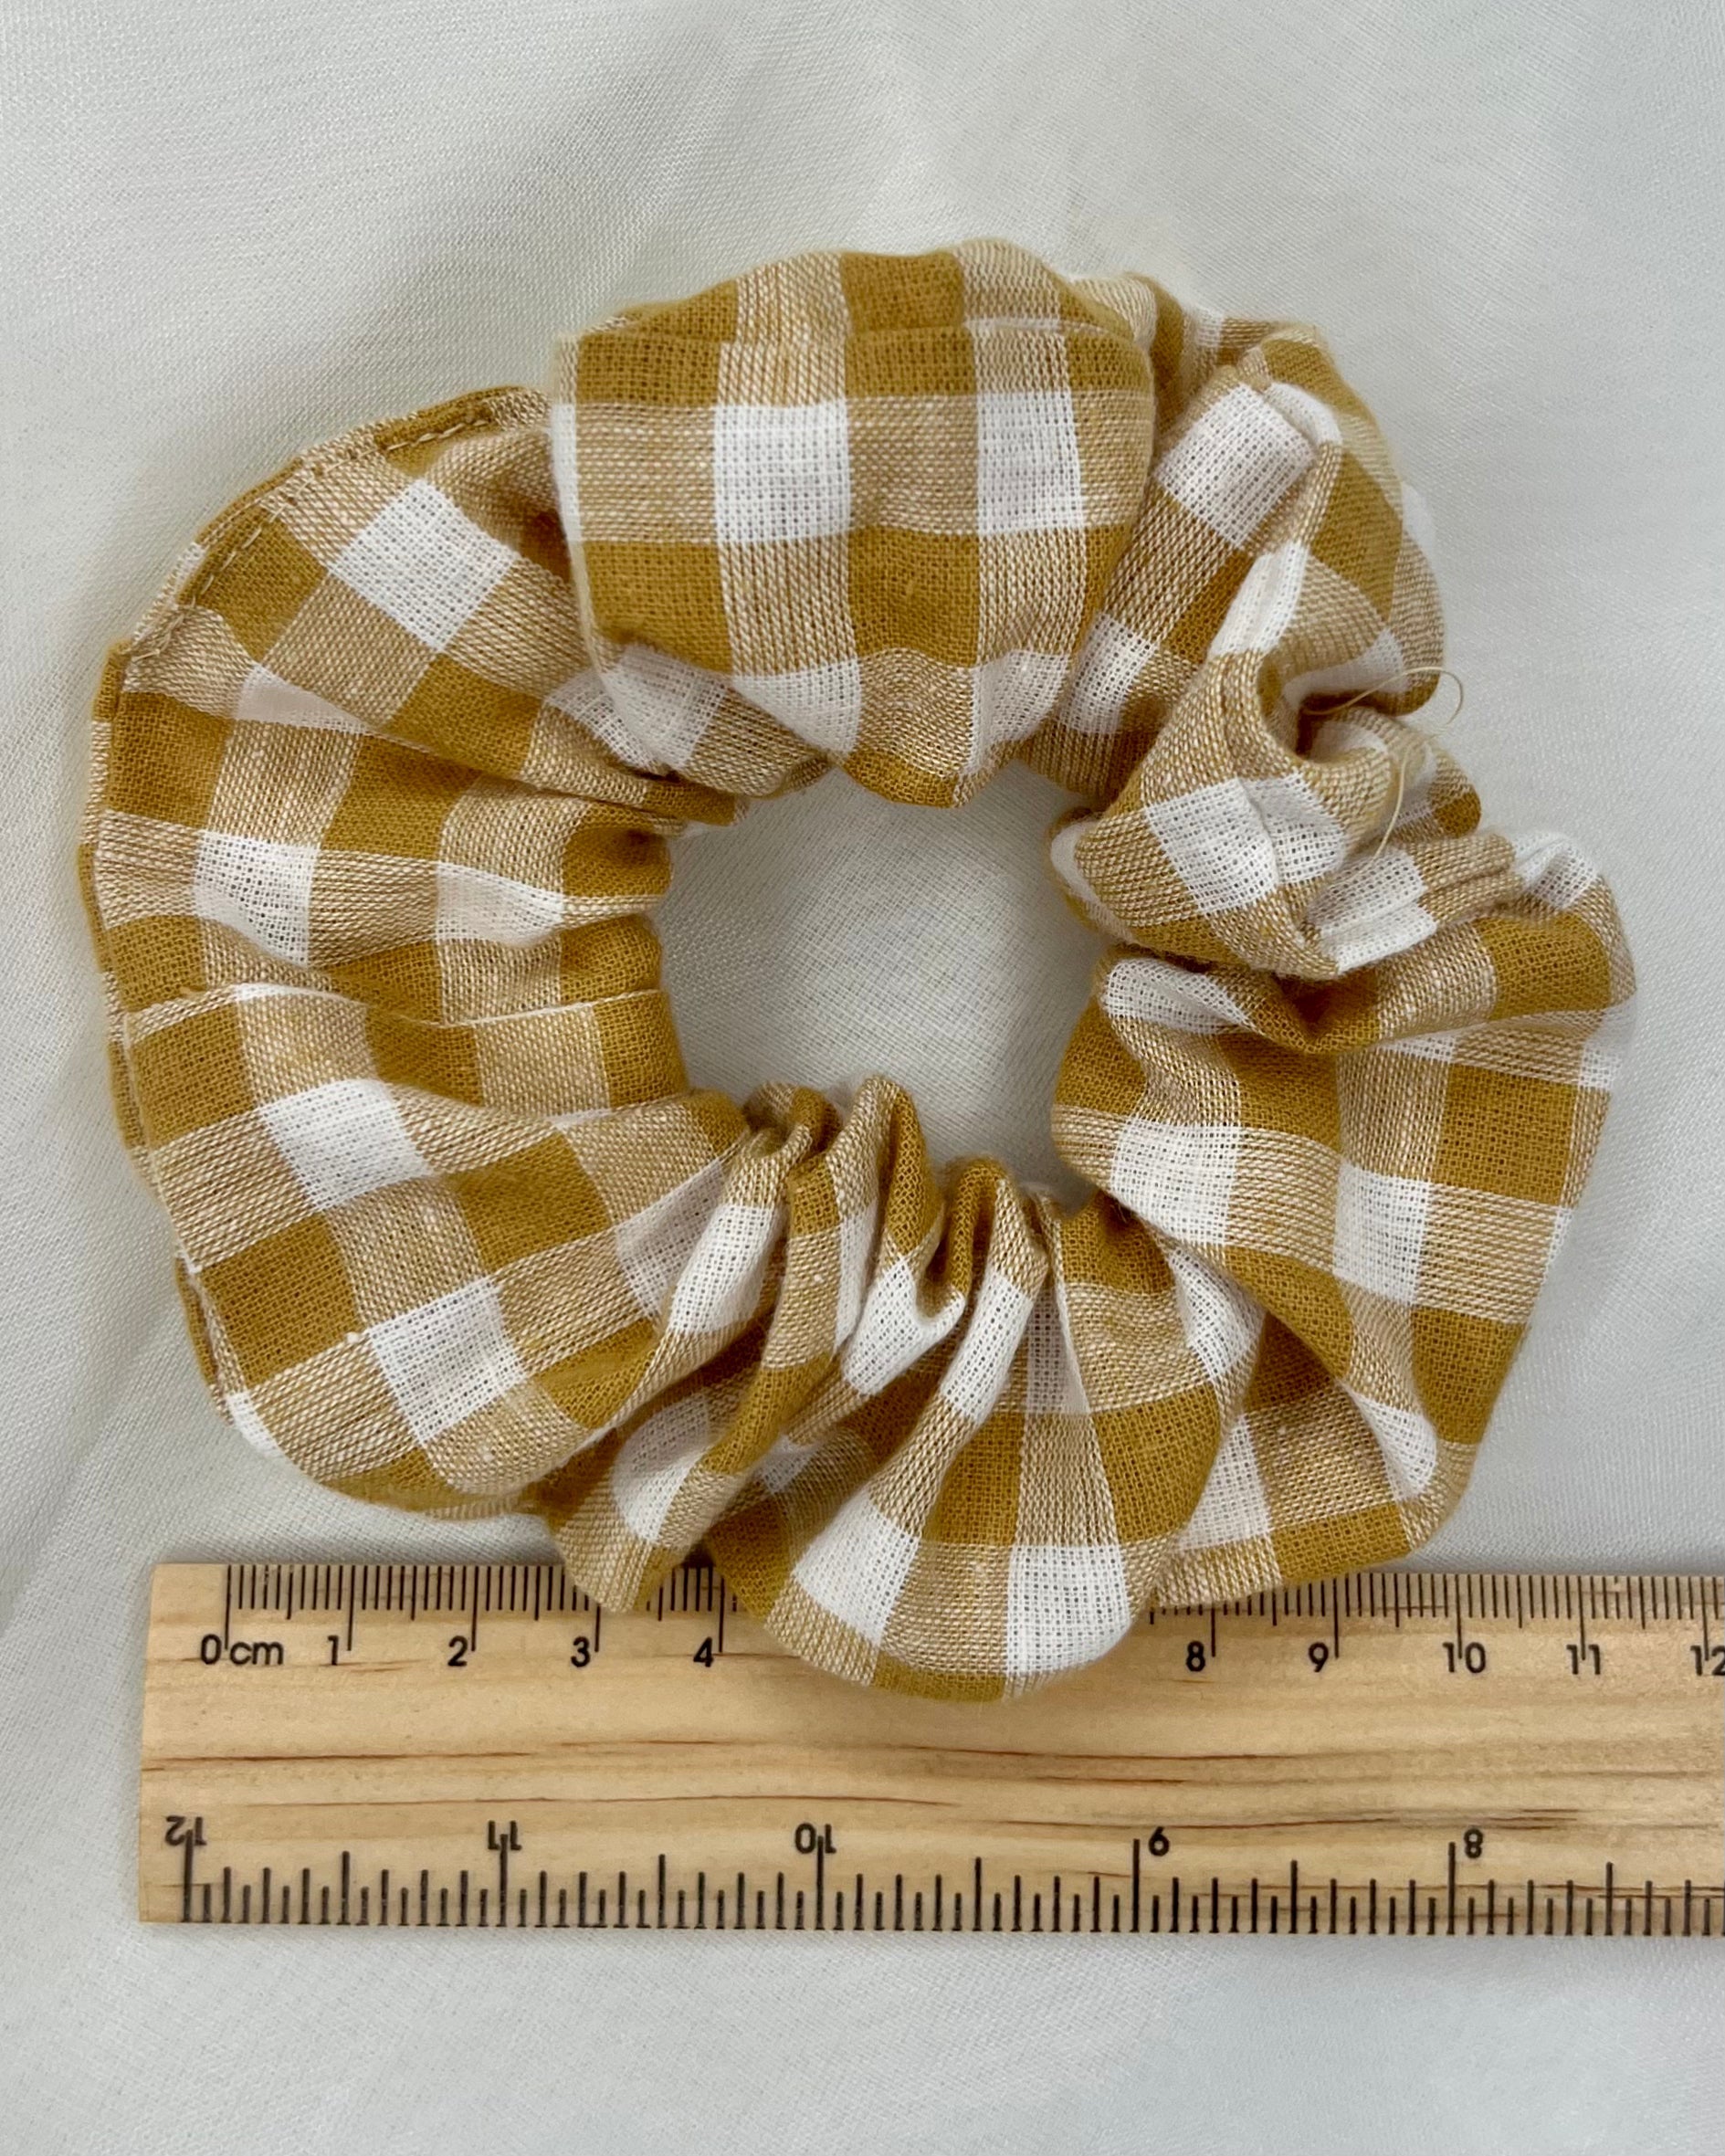 Sage + Stone Handmade Neutral Boho Scrunchies: Hand made in Bunbury WA by Sage + Stone, these beautiful pieces bring a sweet neutral boho vibe to your wardrobe

Handmade with various fabrics
Please see photos for - Ciao Bella Dresses 